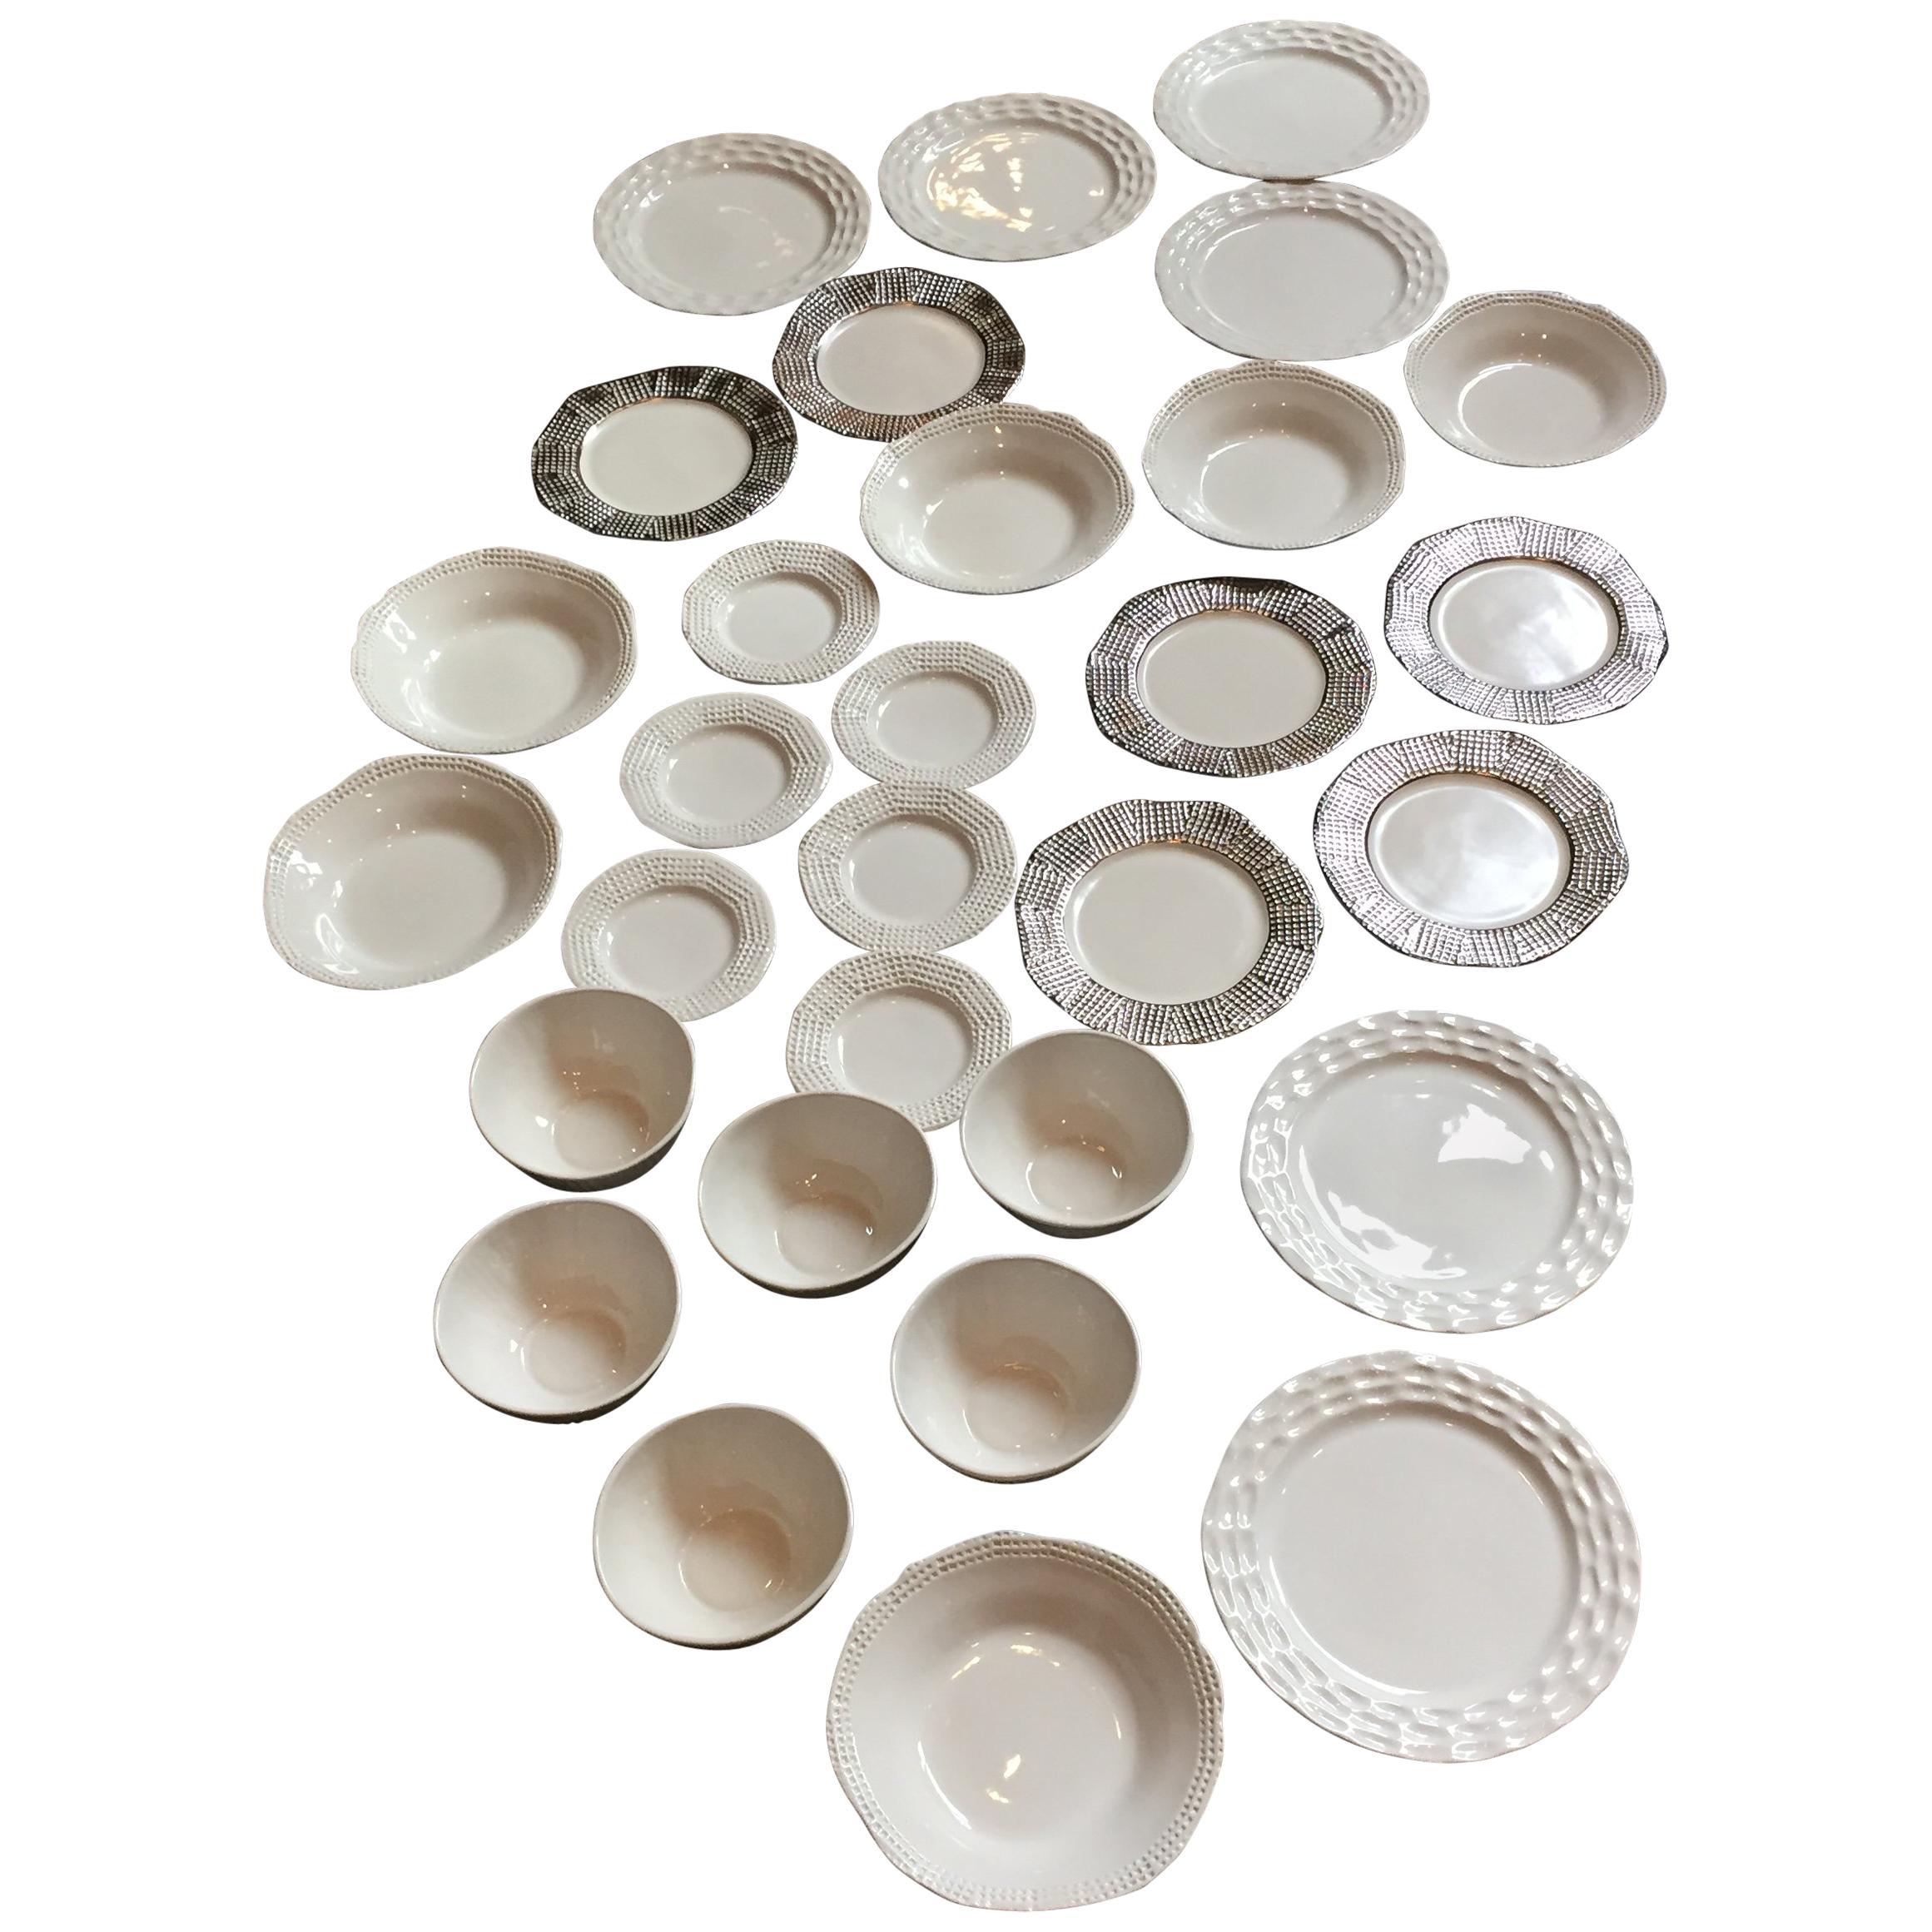 Michael Wainwright Dinnerware Set of 30 Pieces 1990s Limited Edition For Sale